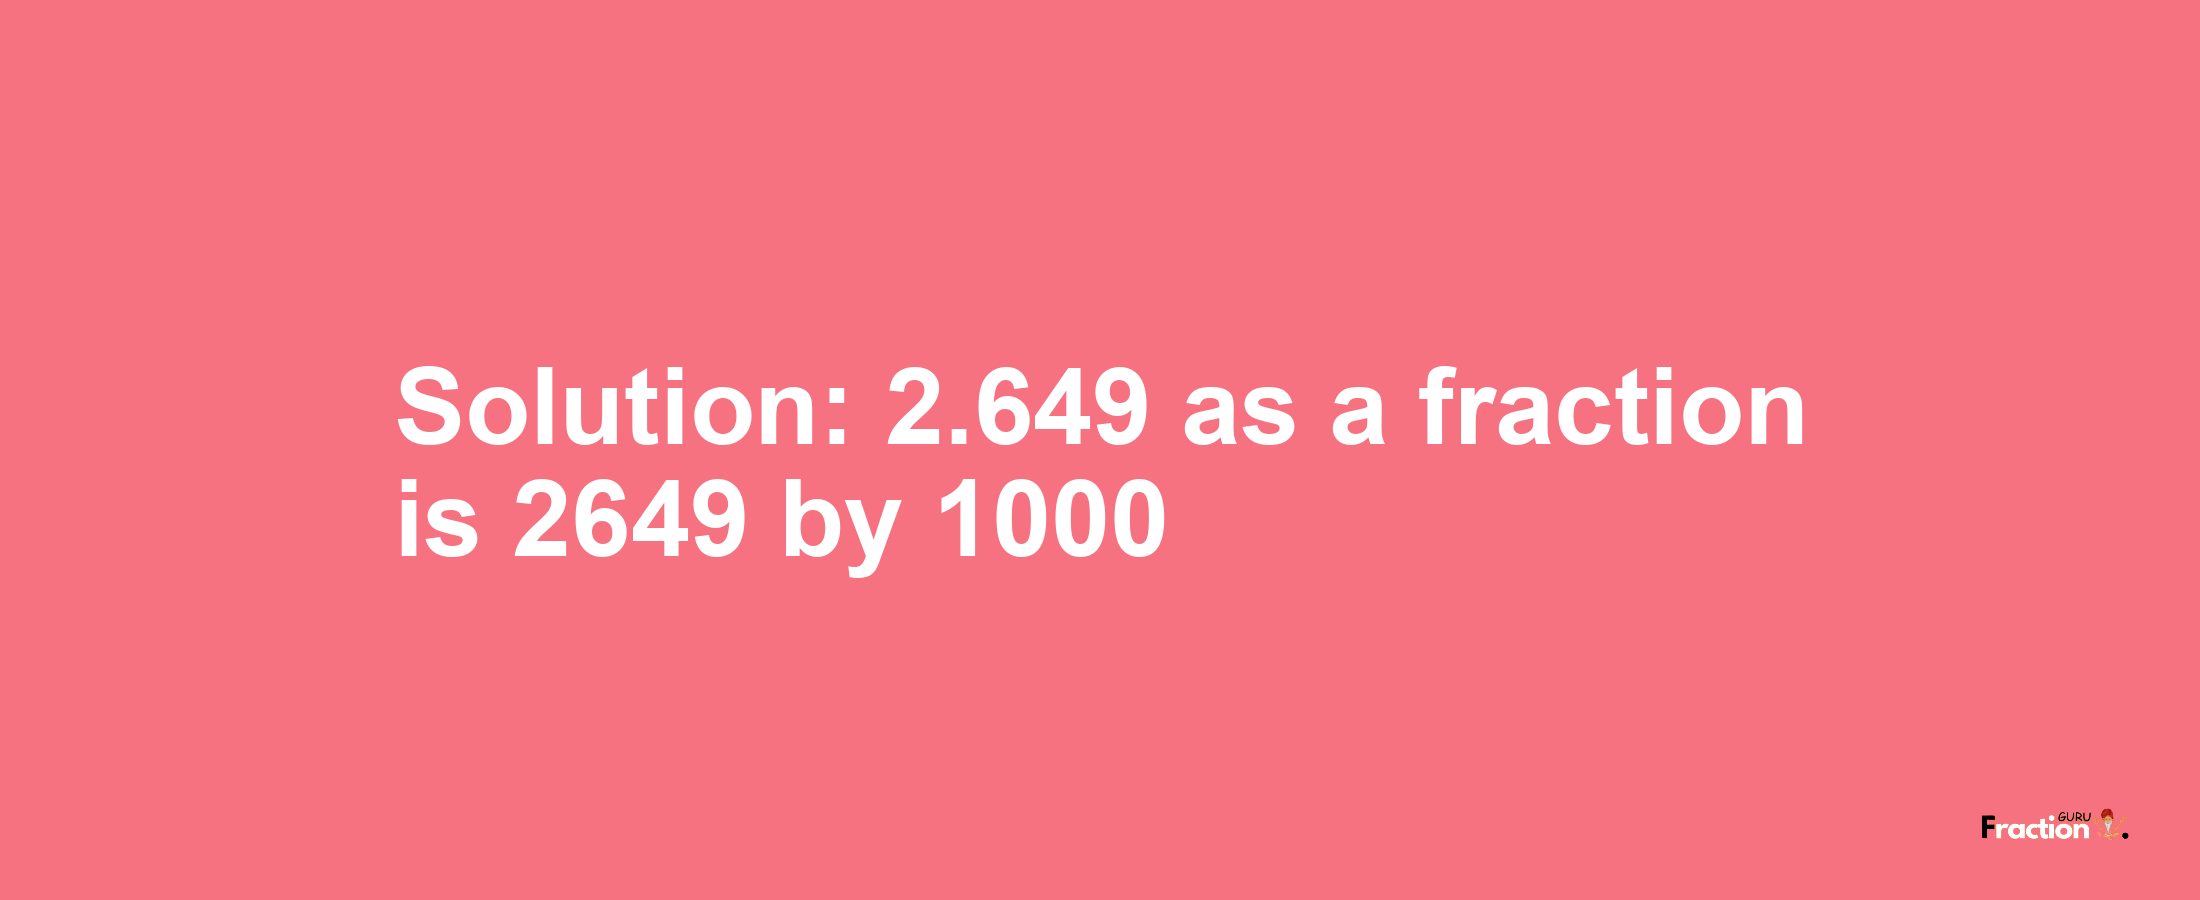 Solution:2.649 as a fraction is 2649/1000